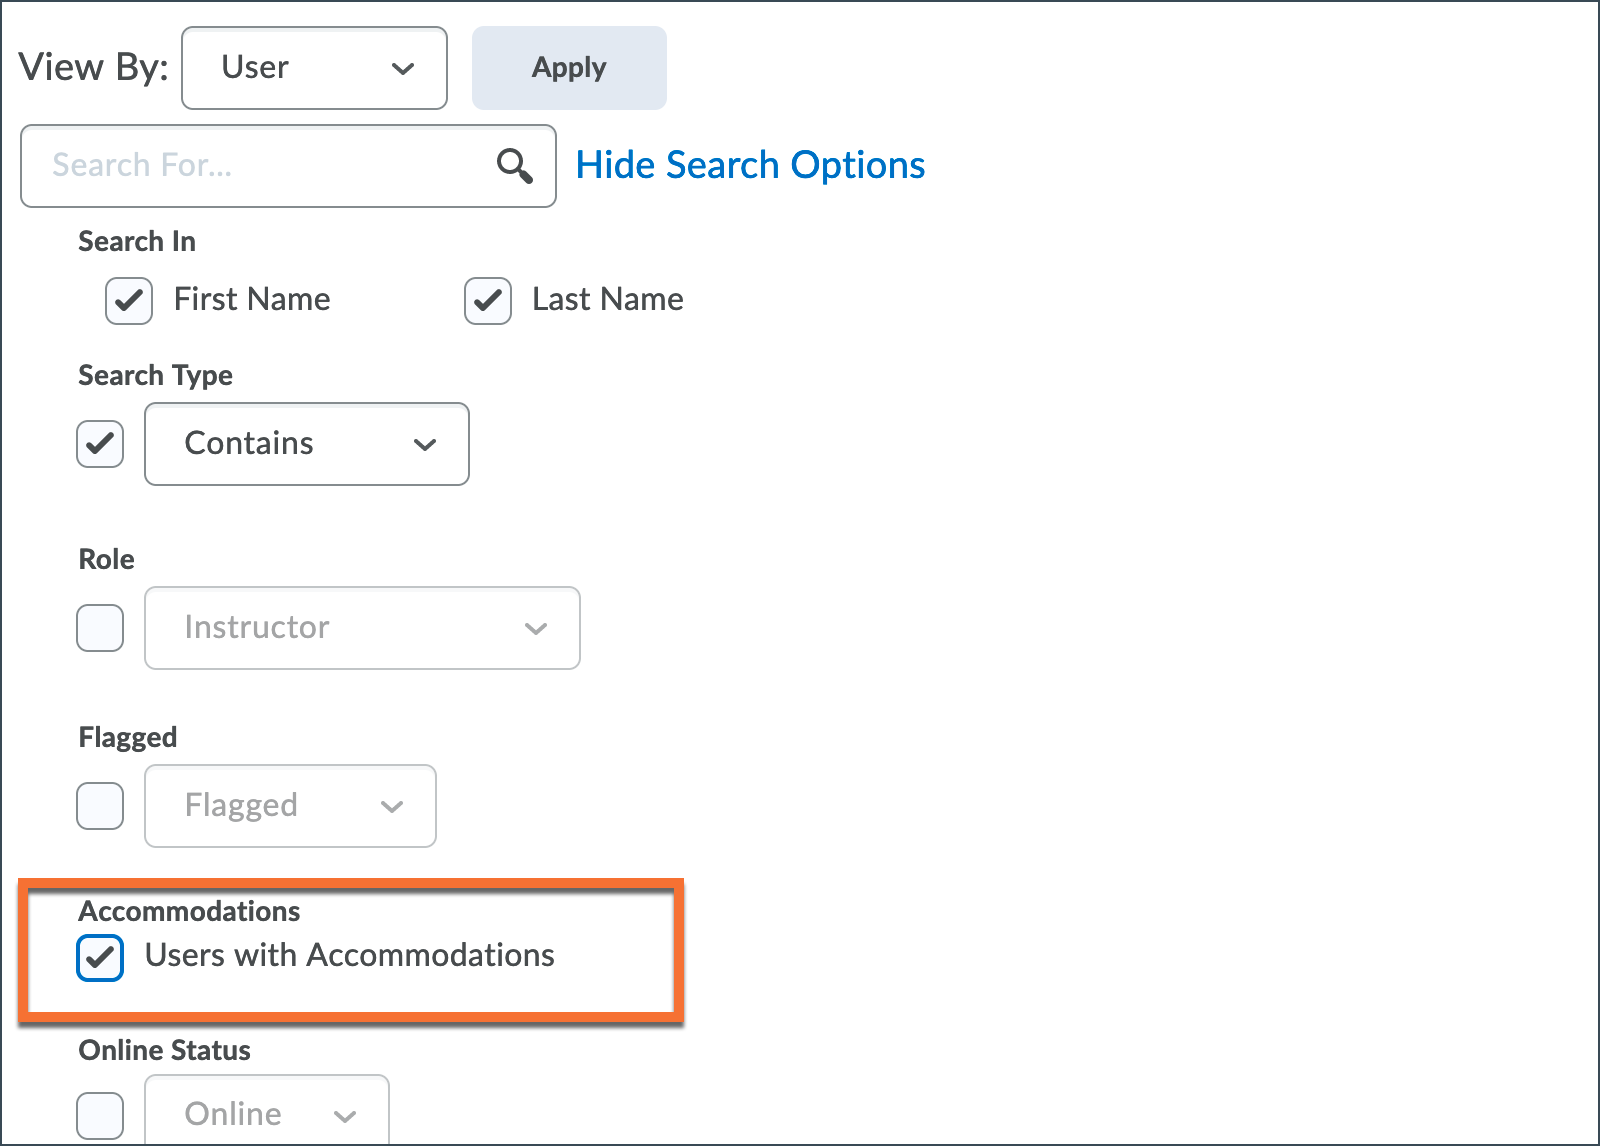 Select to filter the classlist by users with Accommodations set